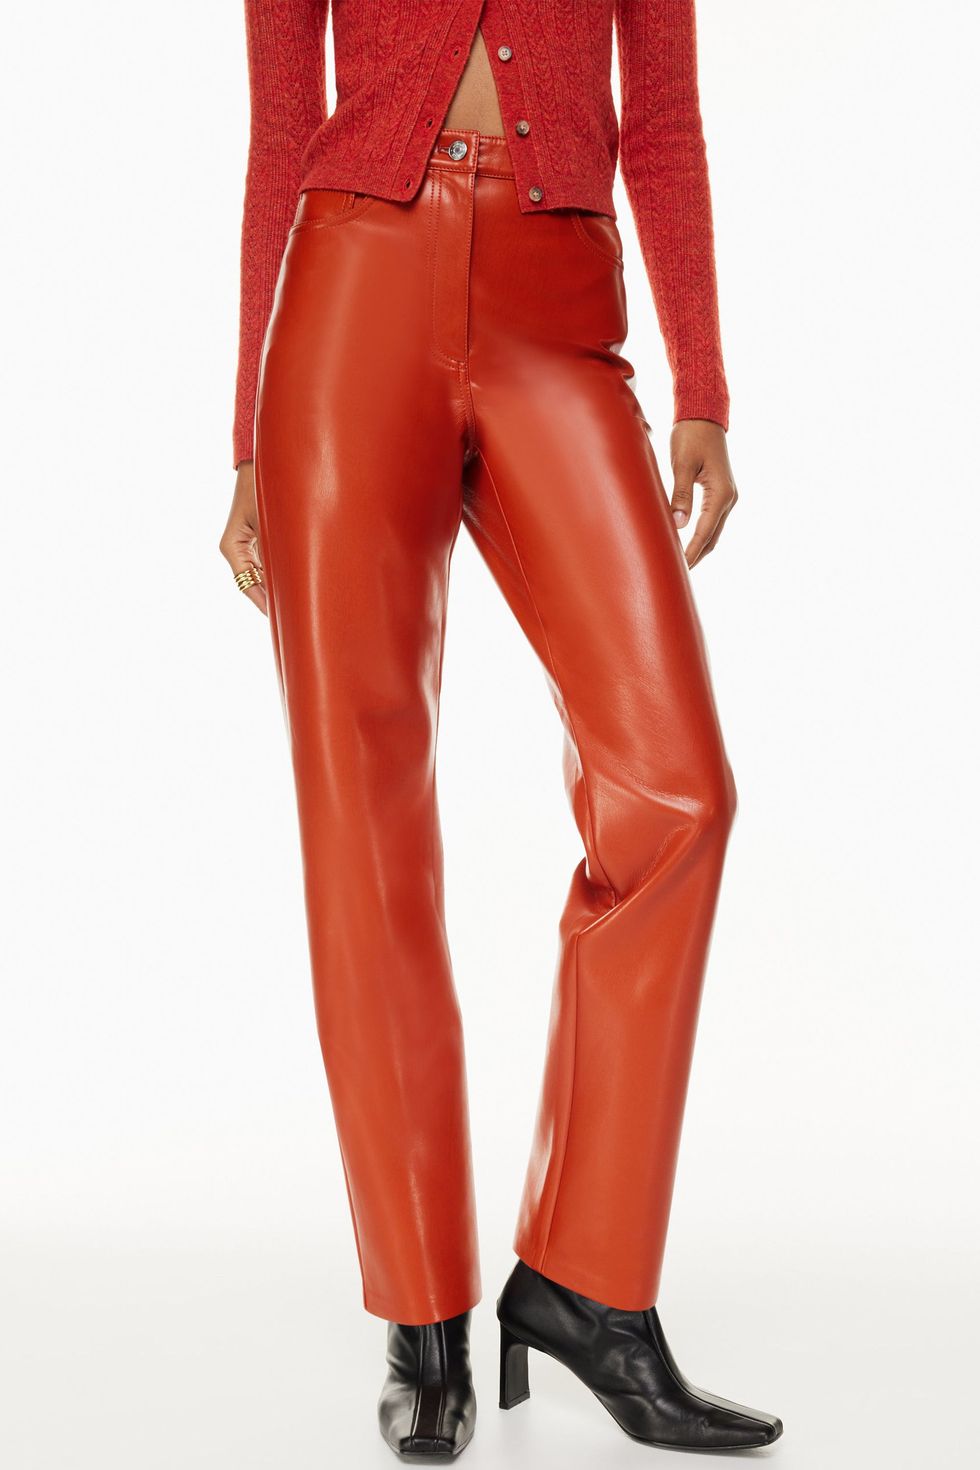 The Wilfred Melina Pant is a high-rise vegan leather pants. And